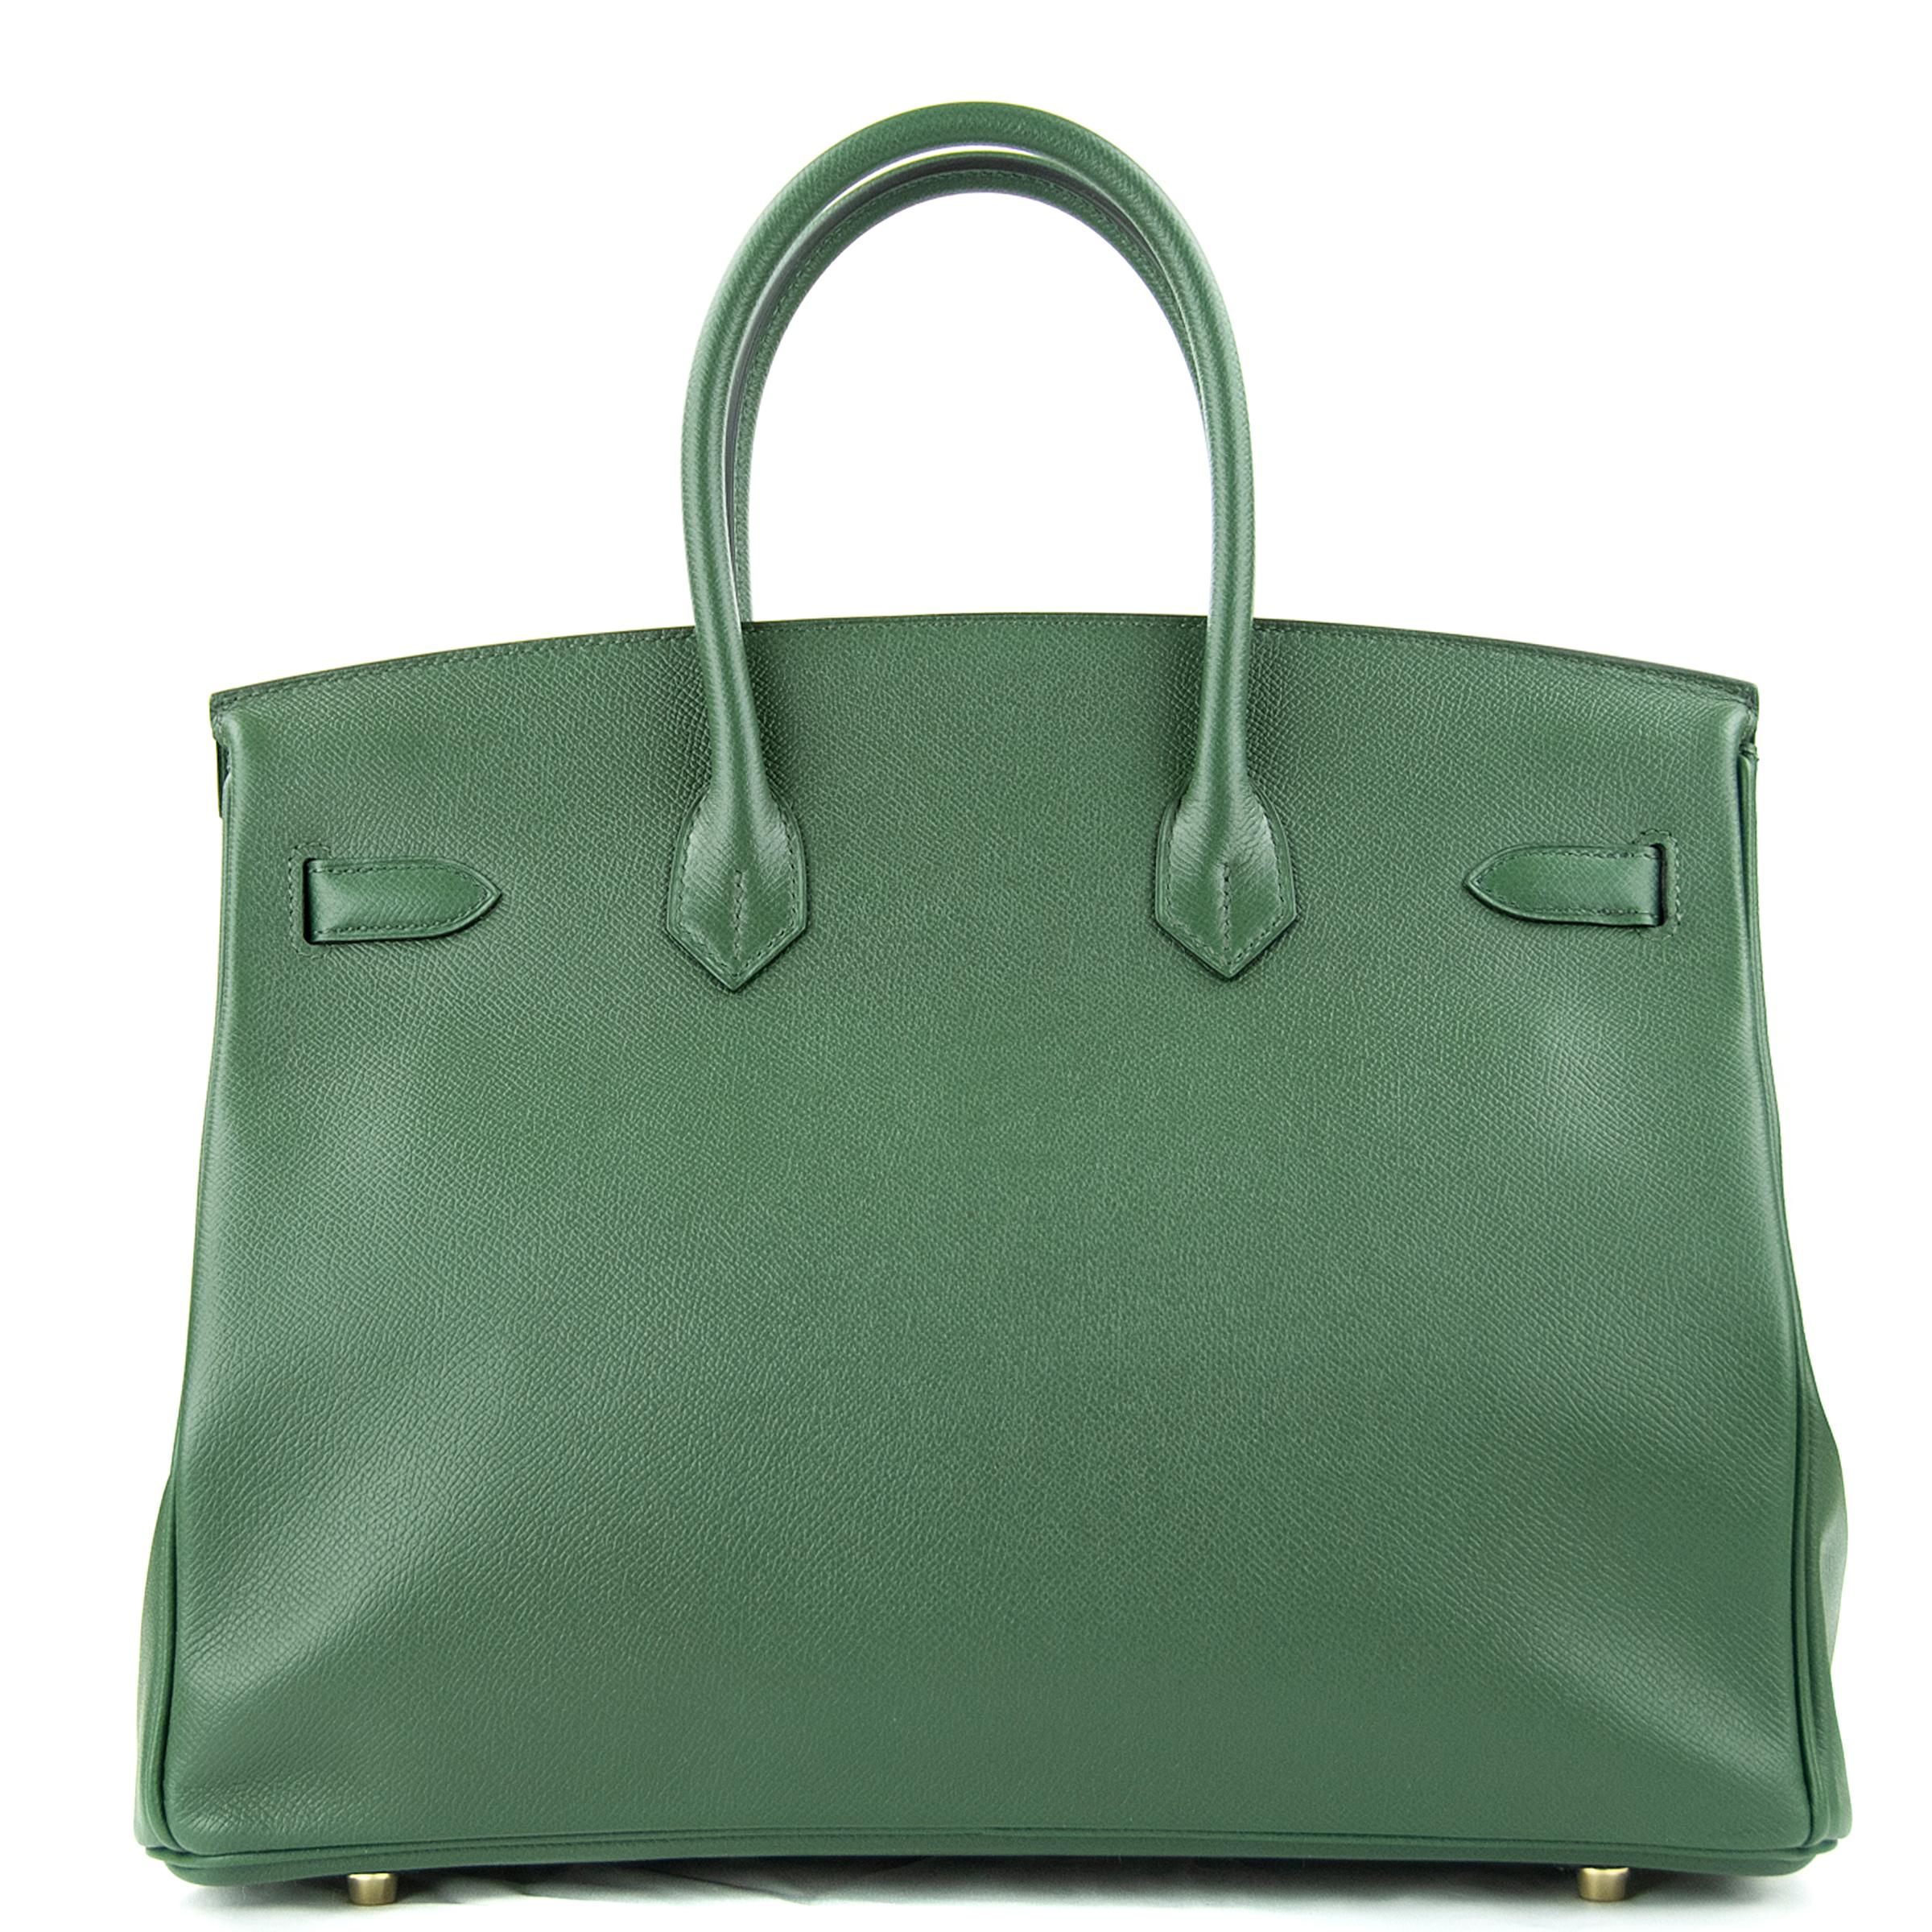 Hermes 35cm Birkin bag in Vert Fonce Epsom. This iconic special order Hermes Birkin bag is timeless and chic. Fresh and crisp with gold hardware.

    Condition: New or Never Used
    Made in France
    Bag Measures: 35cm (13.8